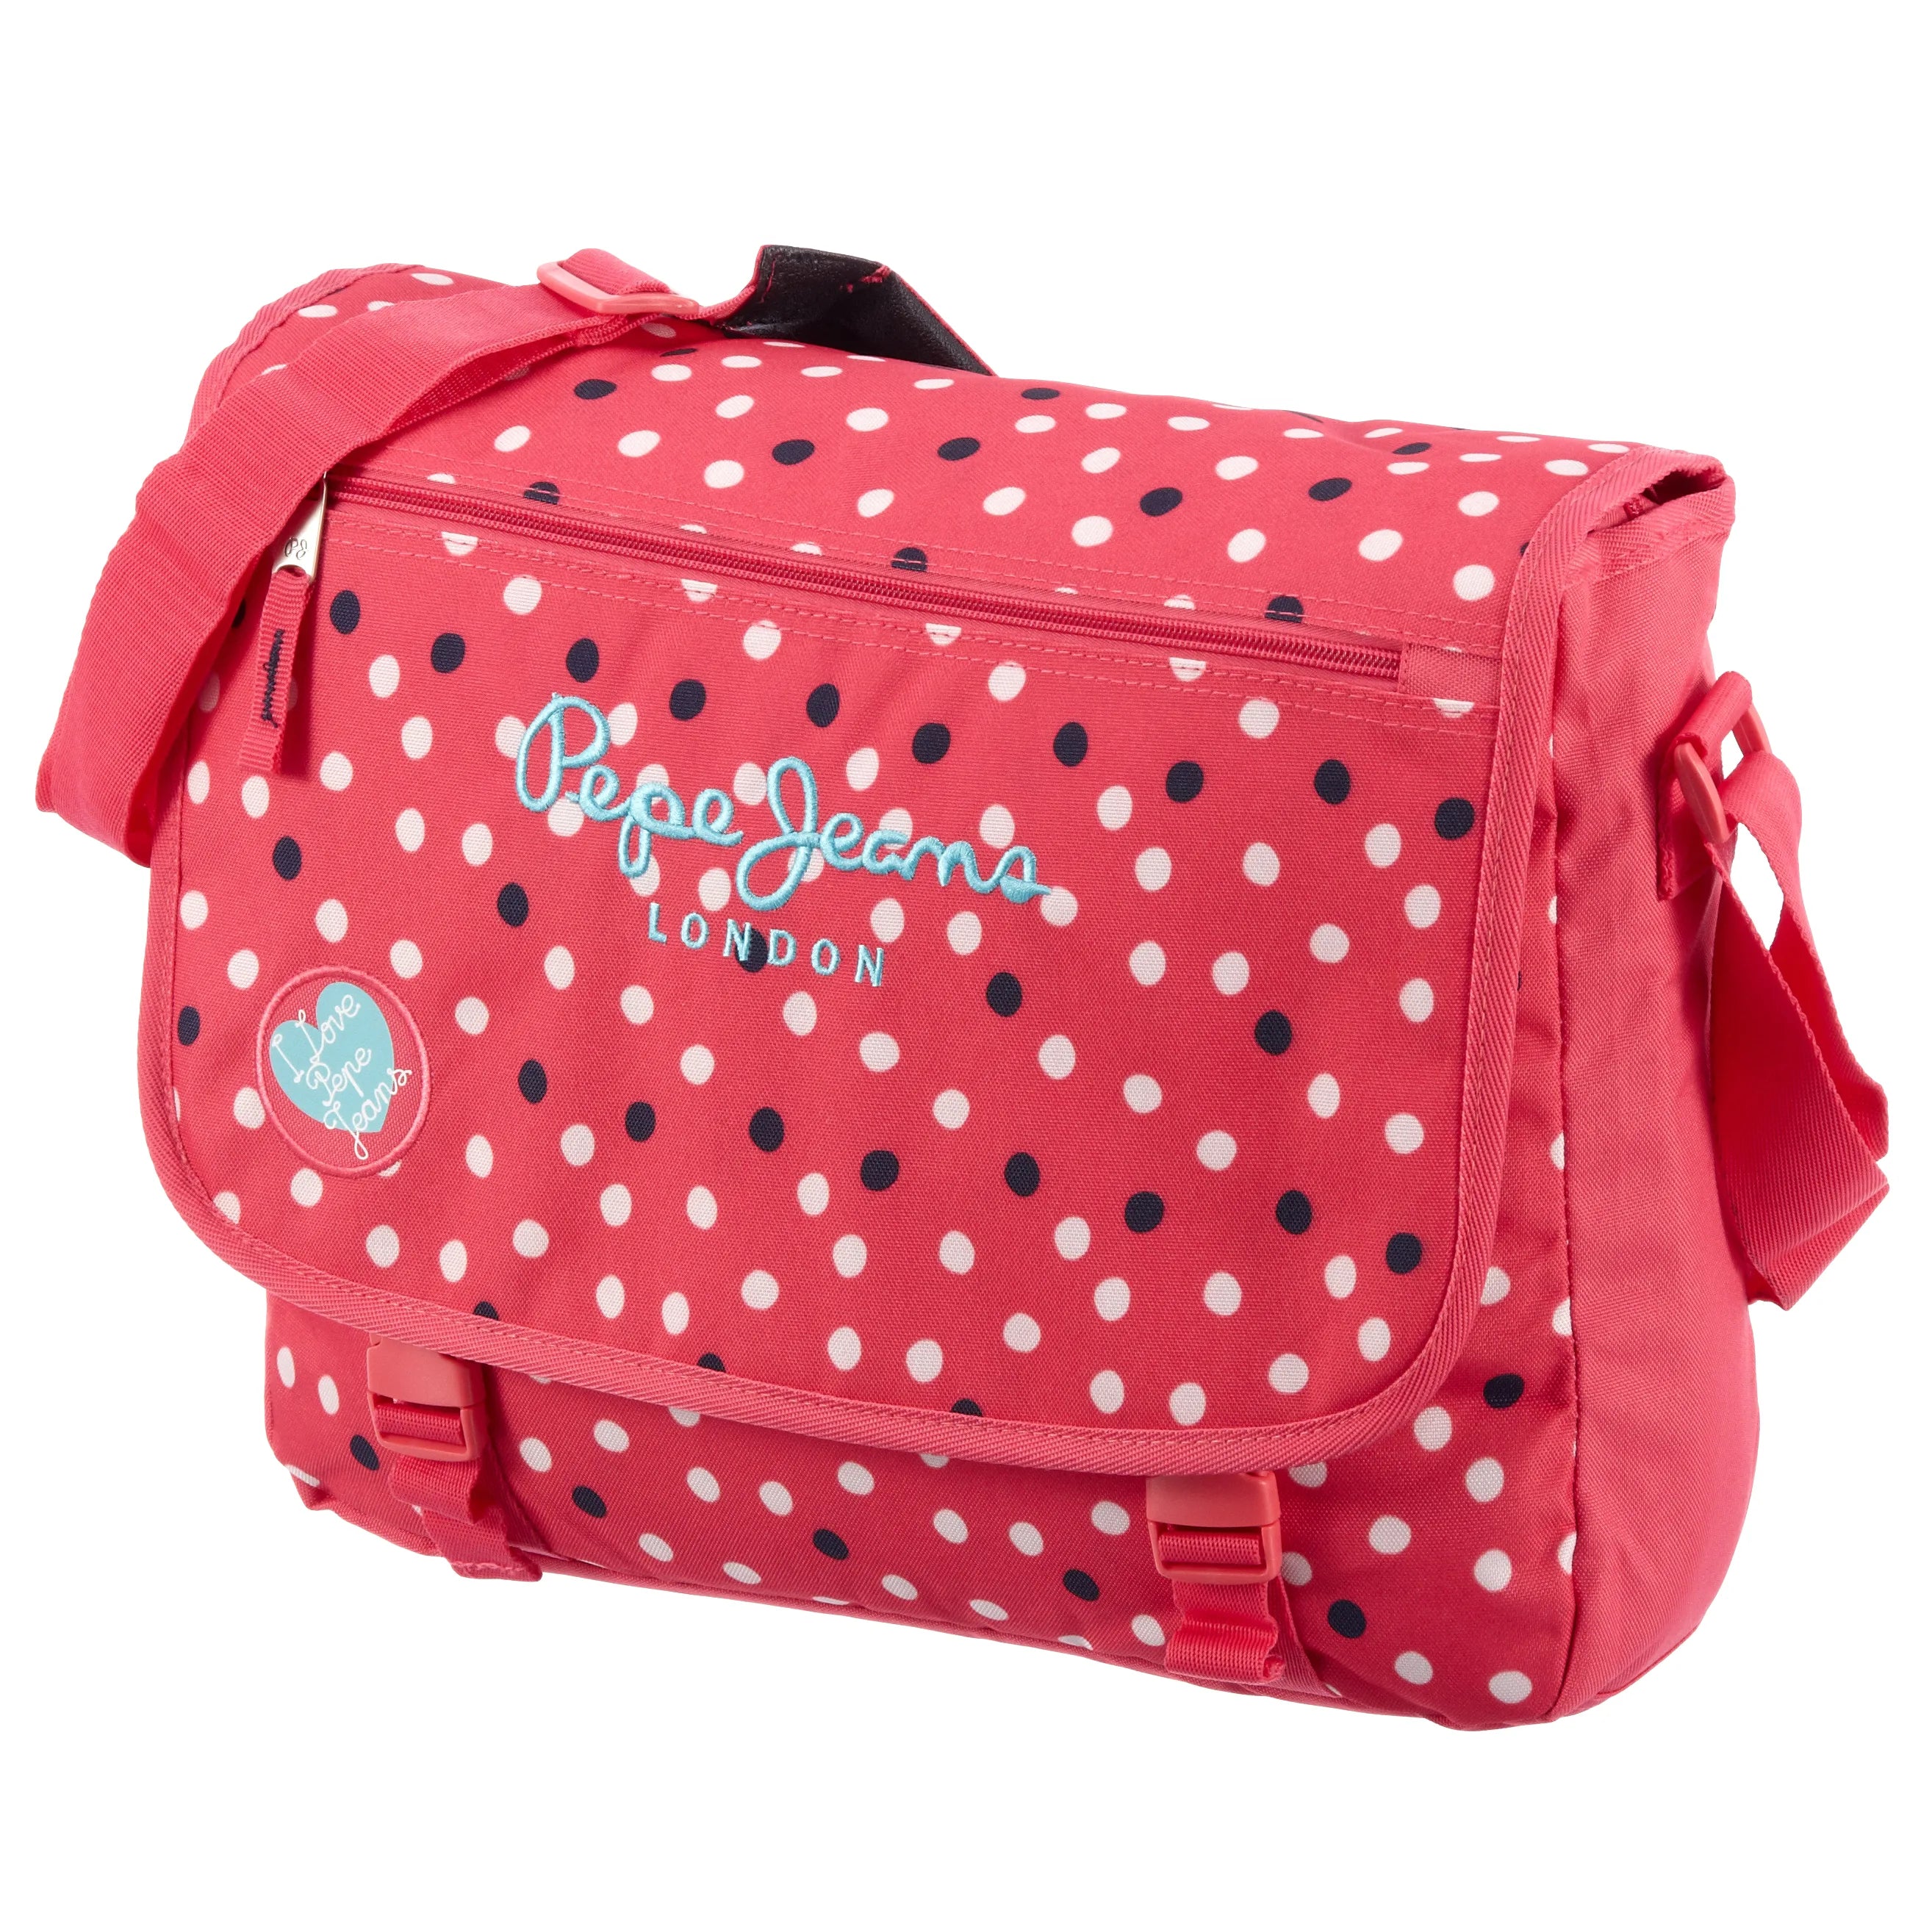 Pepe Jeans Valentina messenger bag with laptop compartment 38 cm - pink